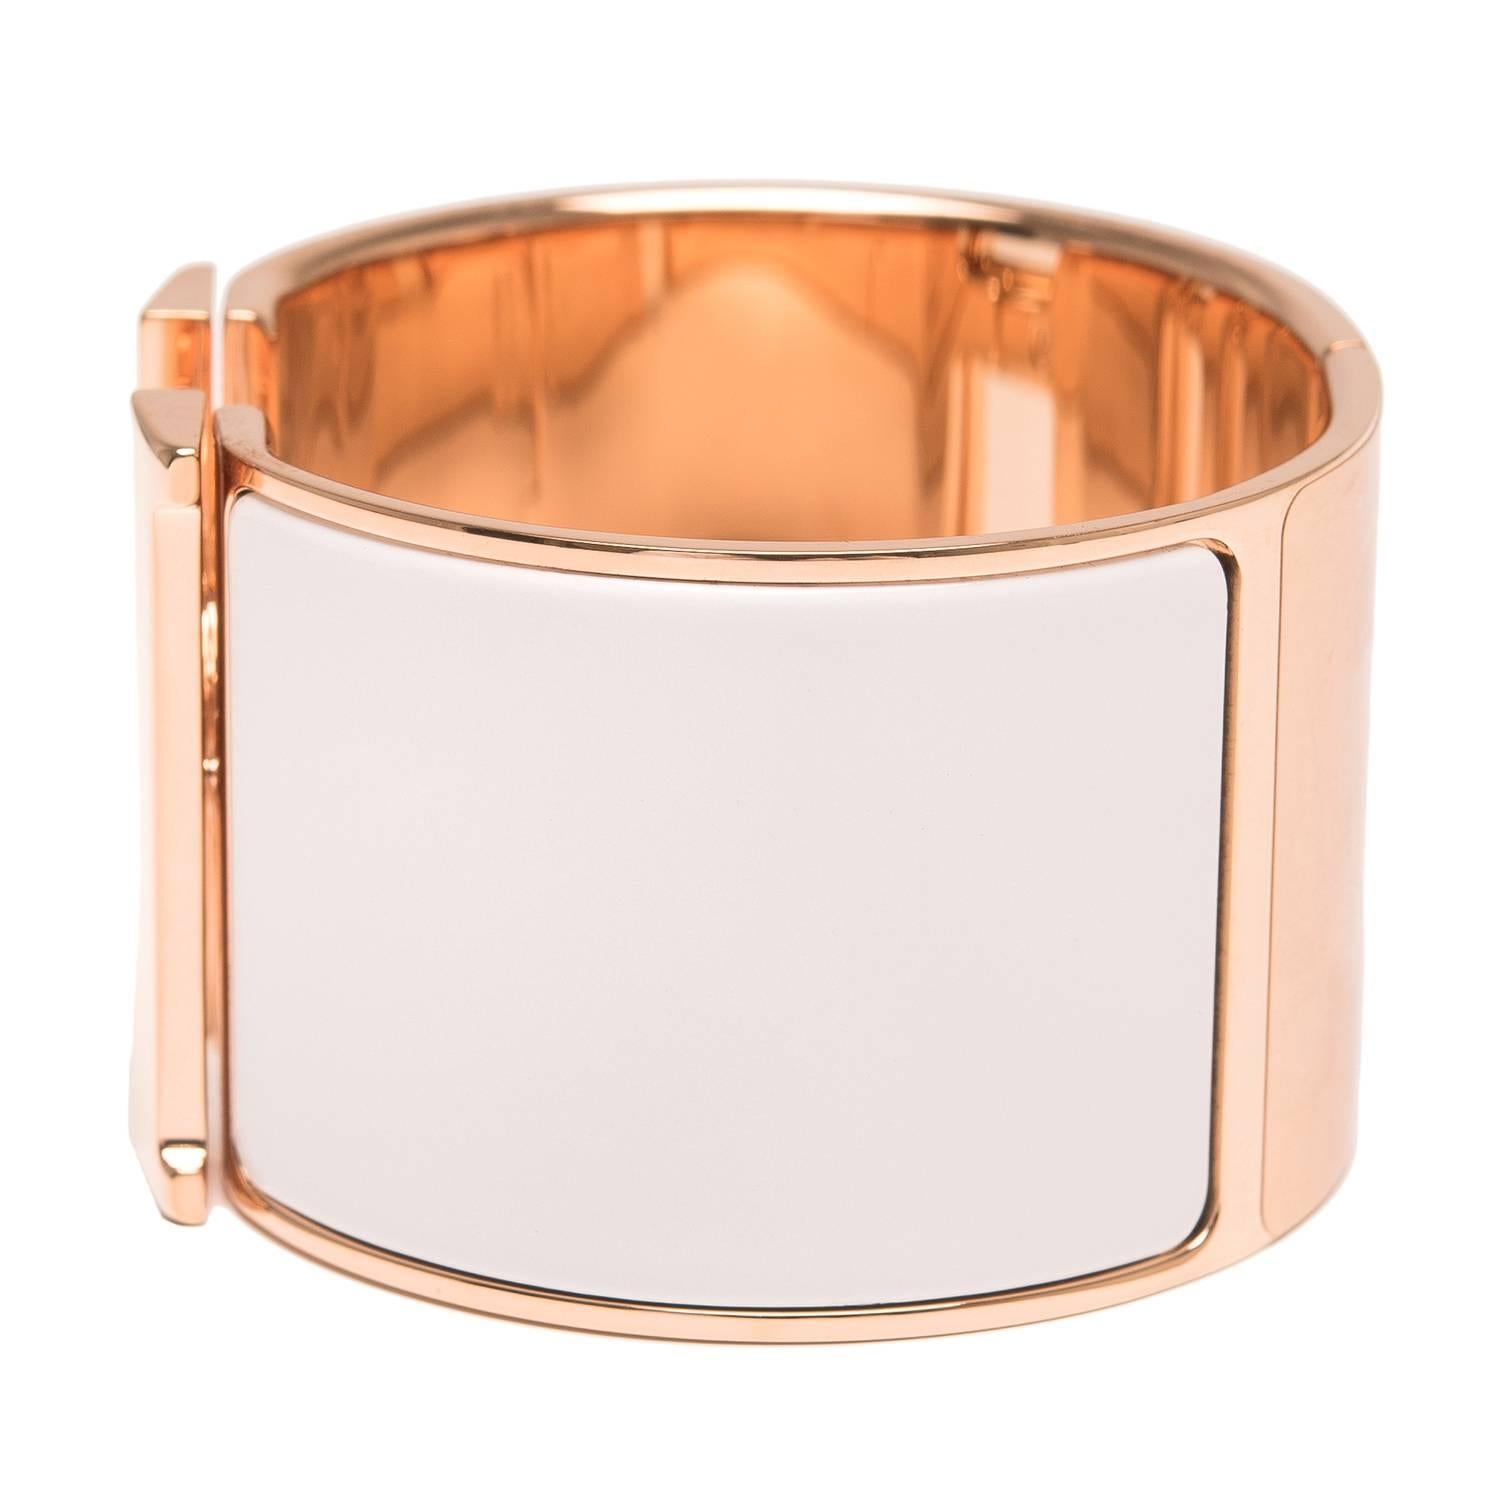 Hermes extra wide Clic Clac H bracelet in White enamel with rose gold plated hardware in size PM.

Origin: France

Condition: Never Carried

Accompanied by: Hermes box, Hermes dustbag, Ribbon

Measurements: Diameter: 2.25